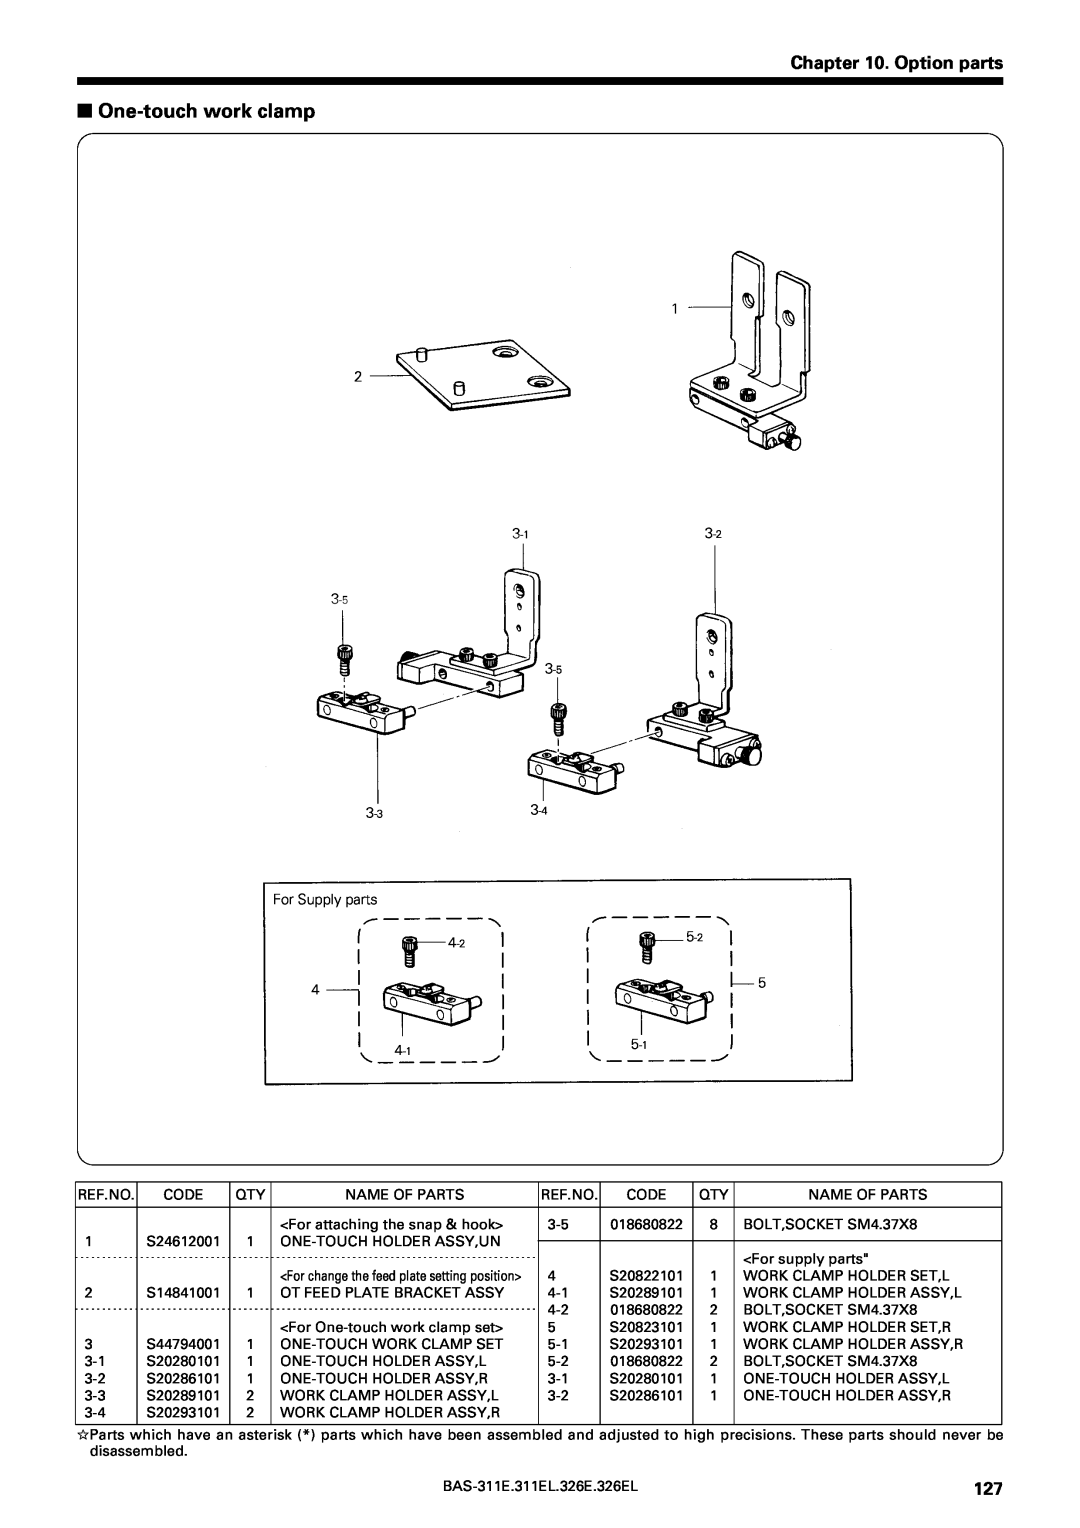 Brother BAS-311E One-touch work clamp, Option parts, For change the feed plate setting position, S20822101, S20289101 